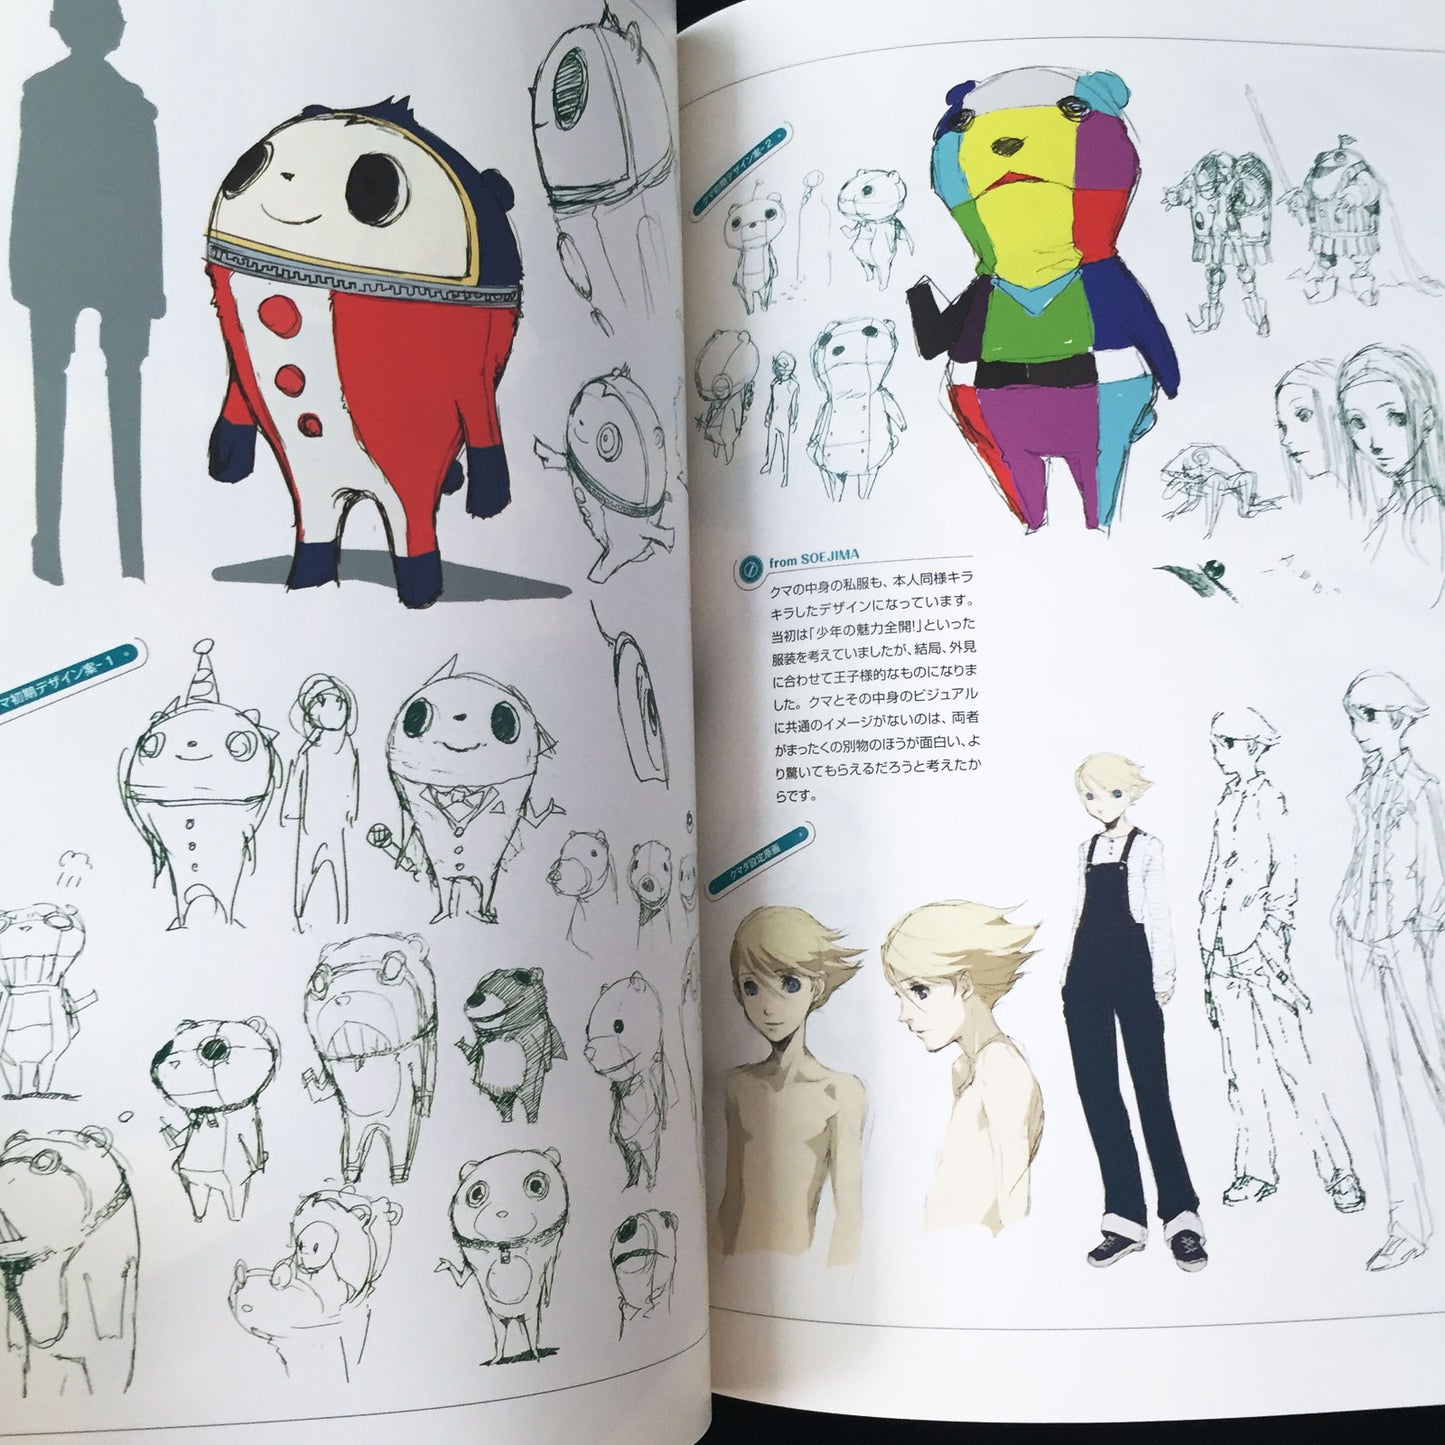 Persona 4 Official Design Works